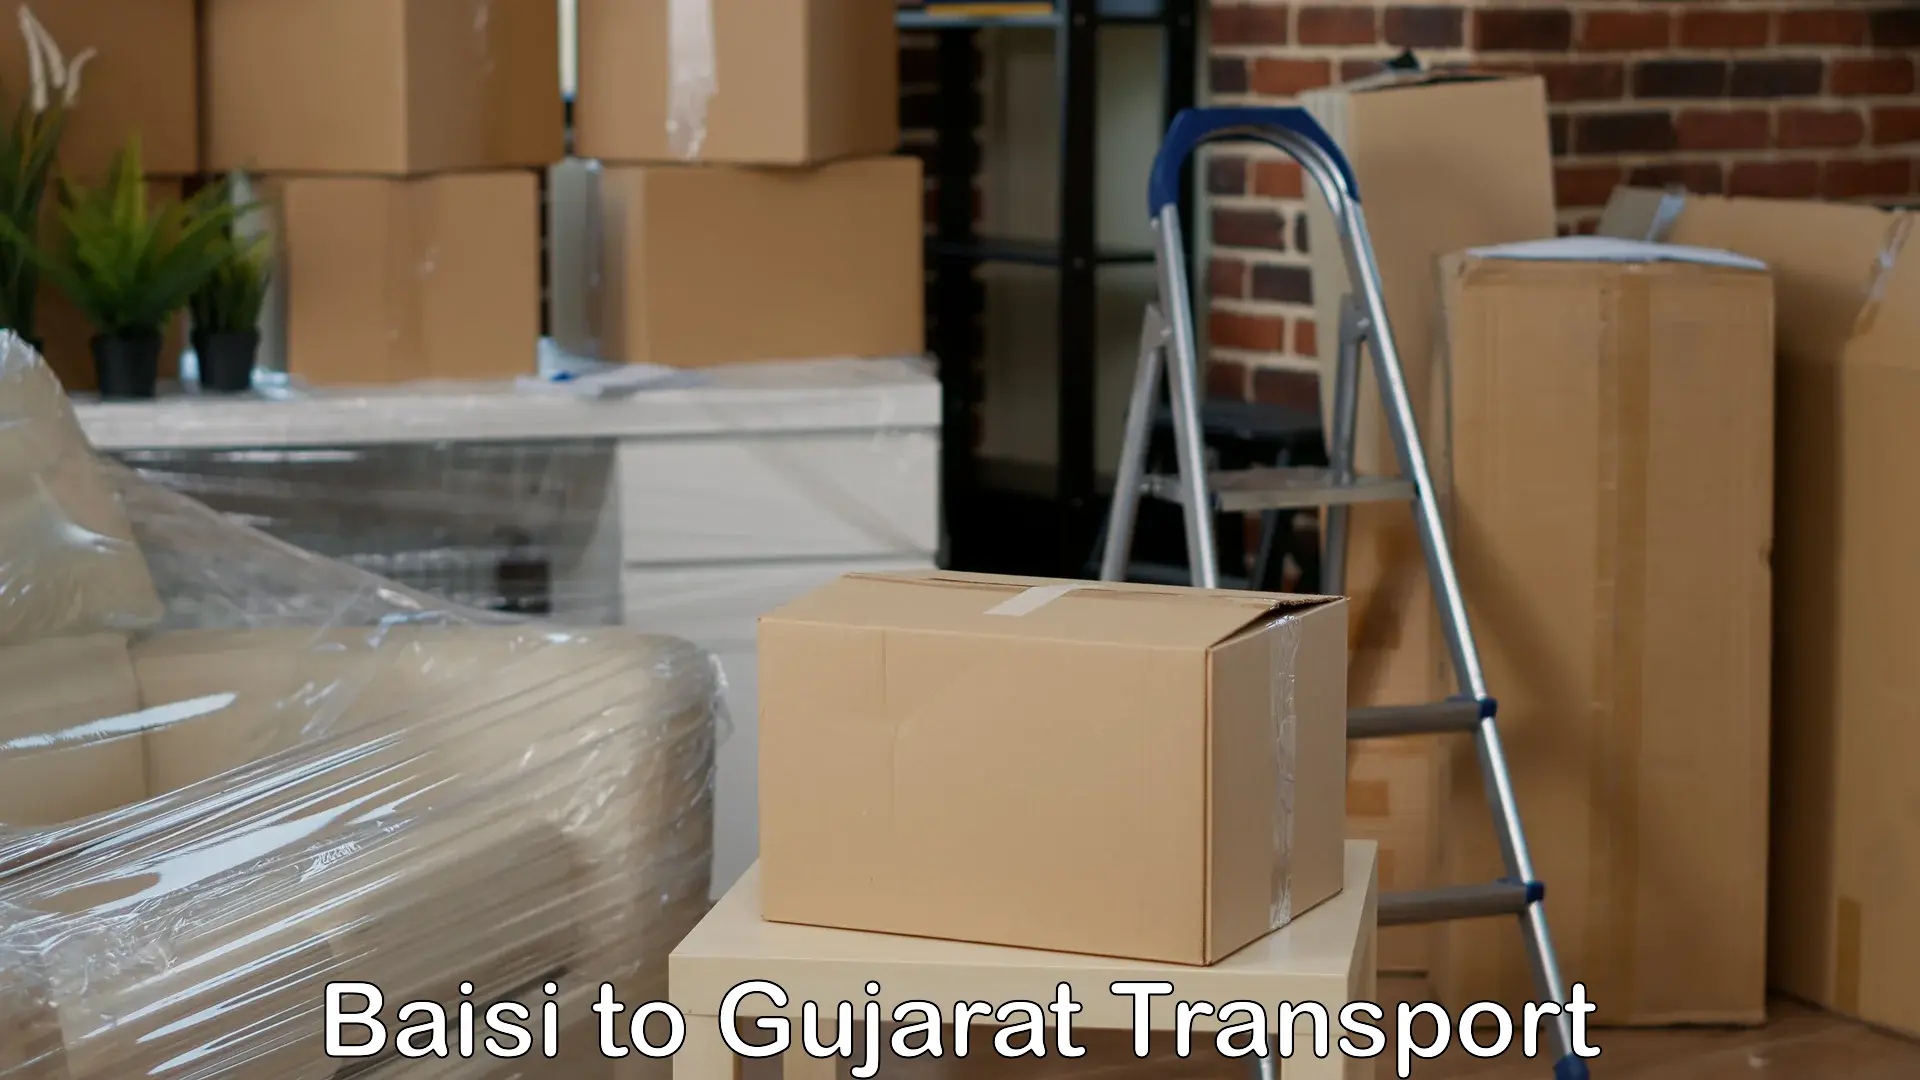 Truck transport companies in India Baisi to Anand Agricultural University